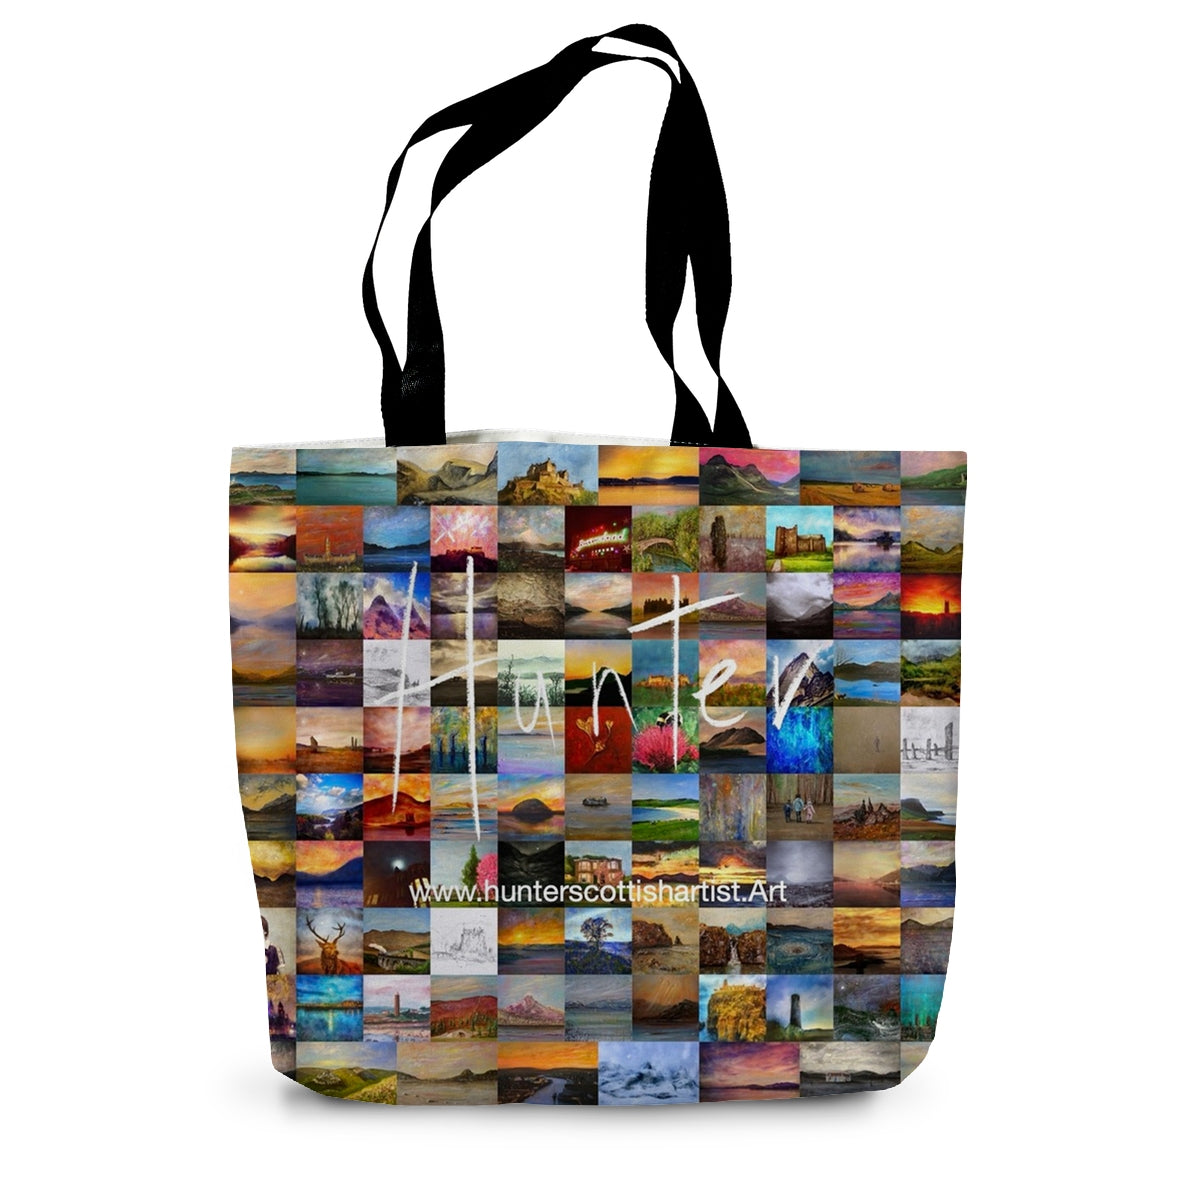 Castle Stalker Dusk Art Gifts Canvas Tote Bag-Bags-Historic & Iconic Scotland Art Gallery-14"x18.5"-Paintings, Prints, Homeware, Art Gifts From Scotland By Scottish Artist Kevin Hunter